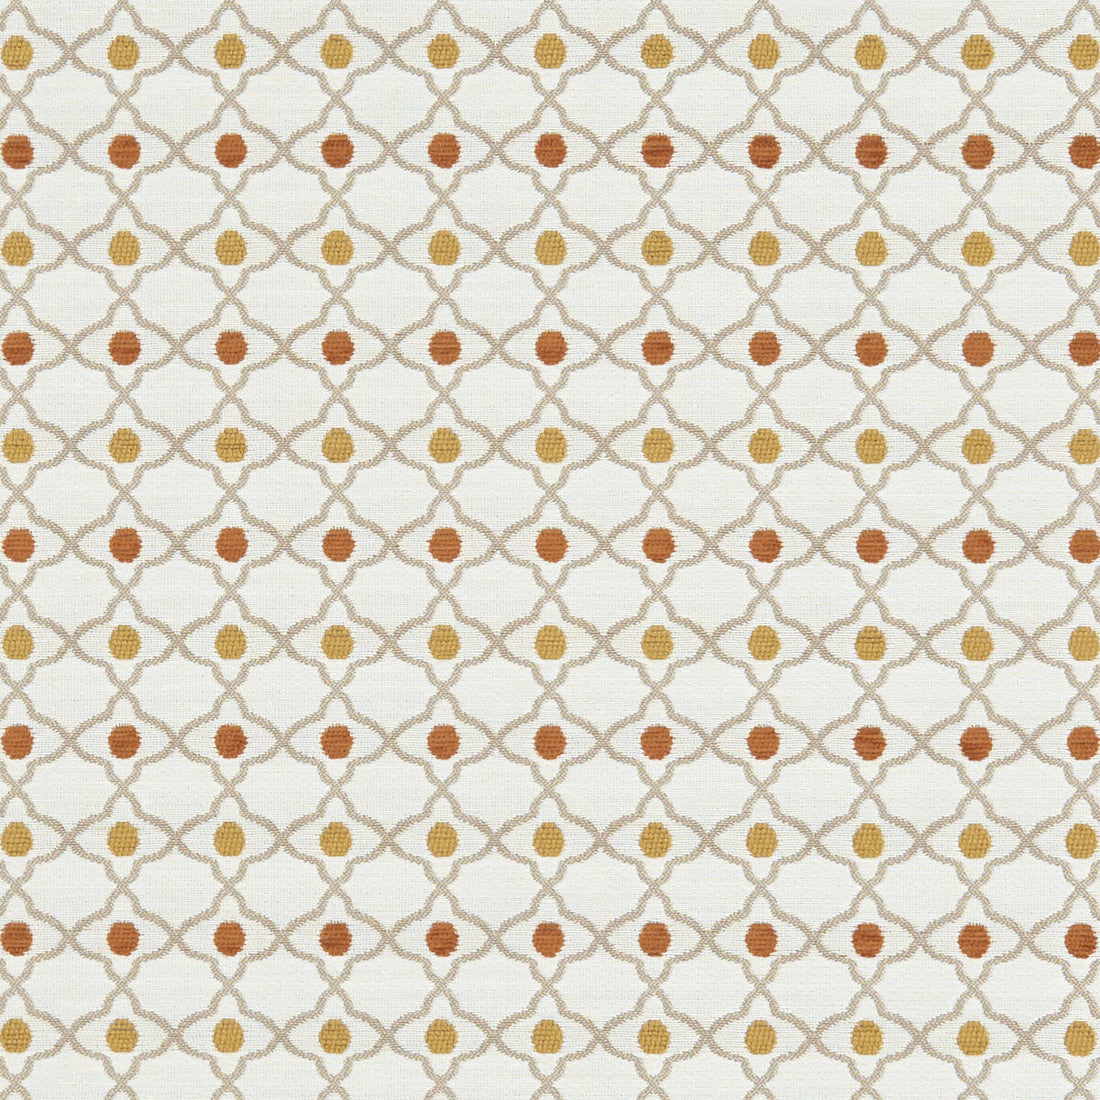 Venus fabric in spice color - pattern F1139/06.CAC.0 - by Clarke And Clarke in the Clarke &amp; Clarke Equinox collection